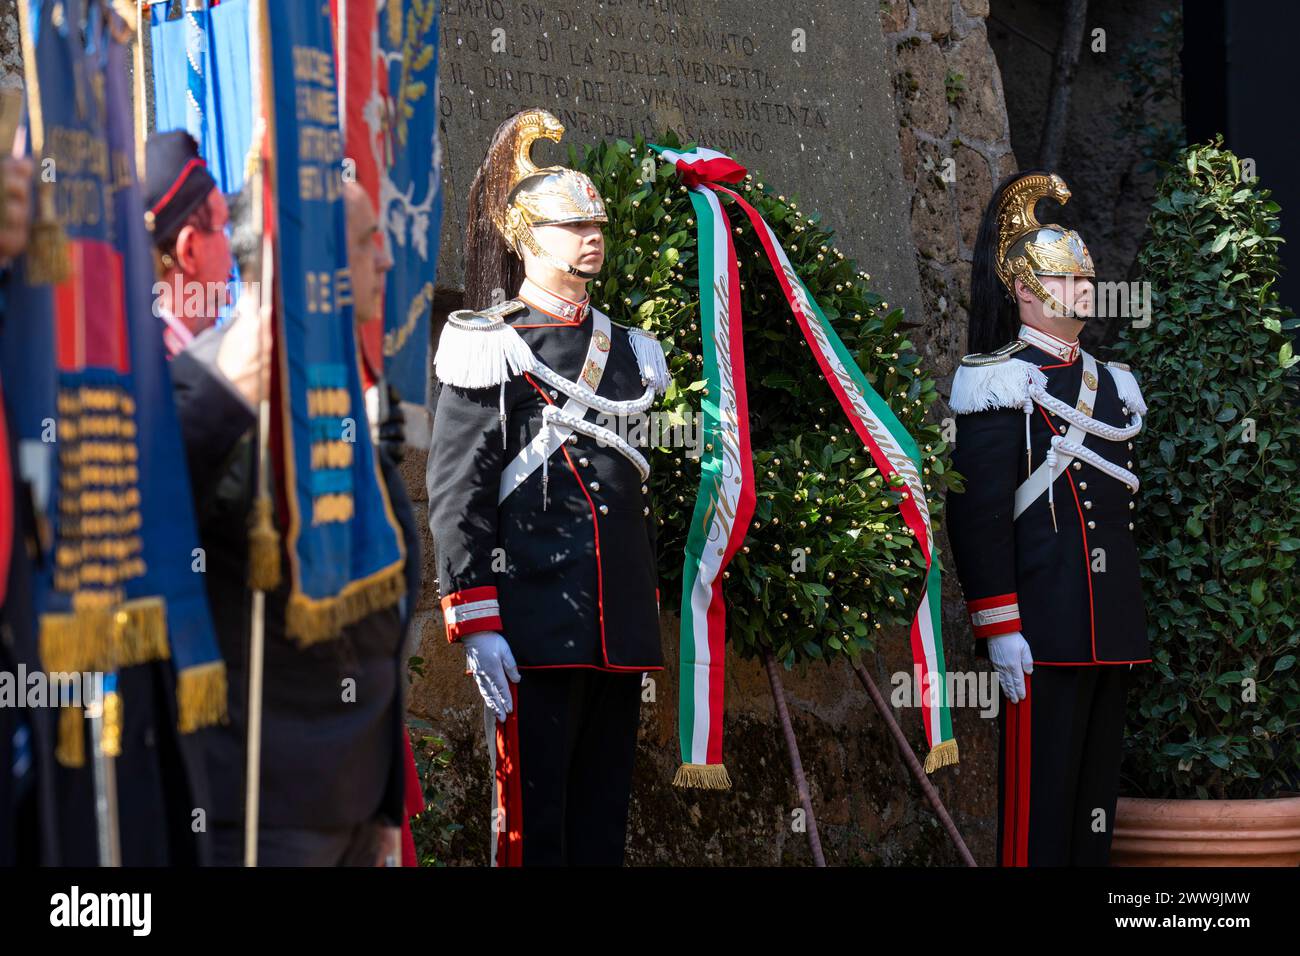 Members of the Corazzieri presidential guards, the Italian Corps of Cuirassiers, pay tribute to the graves of the victims of the Fosse Ardeatine massacre during the ceremony marking the 80th anniversary of the Fosse Ardeatine massacre. The Fosse Ardeatine mass killing of 335 civilians and political prisoners was carried out in this cave area in Rome on 24 March 1944 by German occupation troops during the Second World War as a reprisal for a partisan attack conducted on the previous day in central Rome against the SS Police Regiment Bozen. Credit: SOPA Images Limited/Alamy Live News Stock Photo